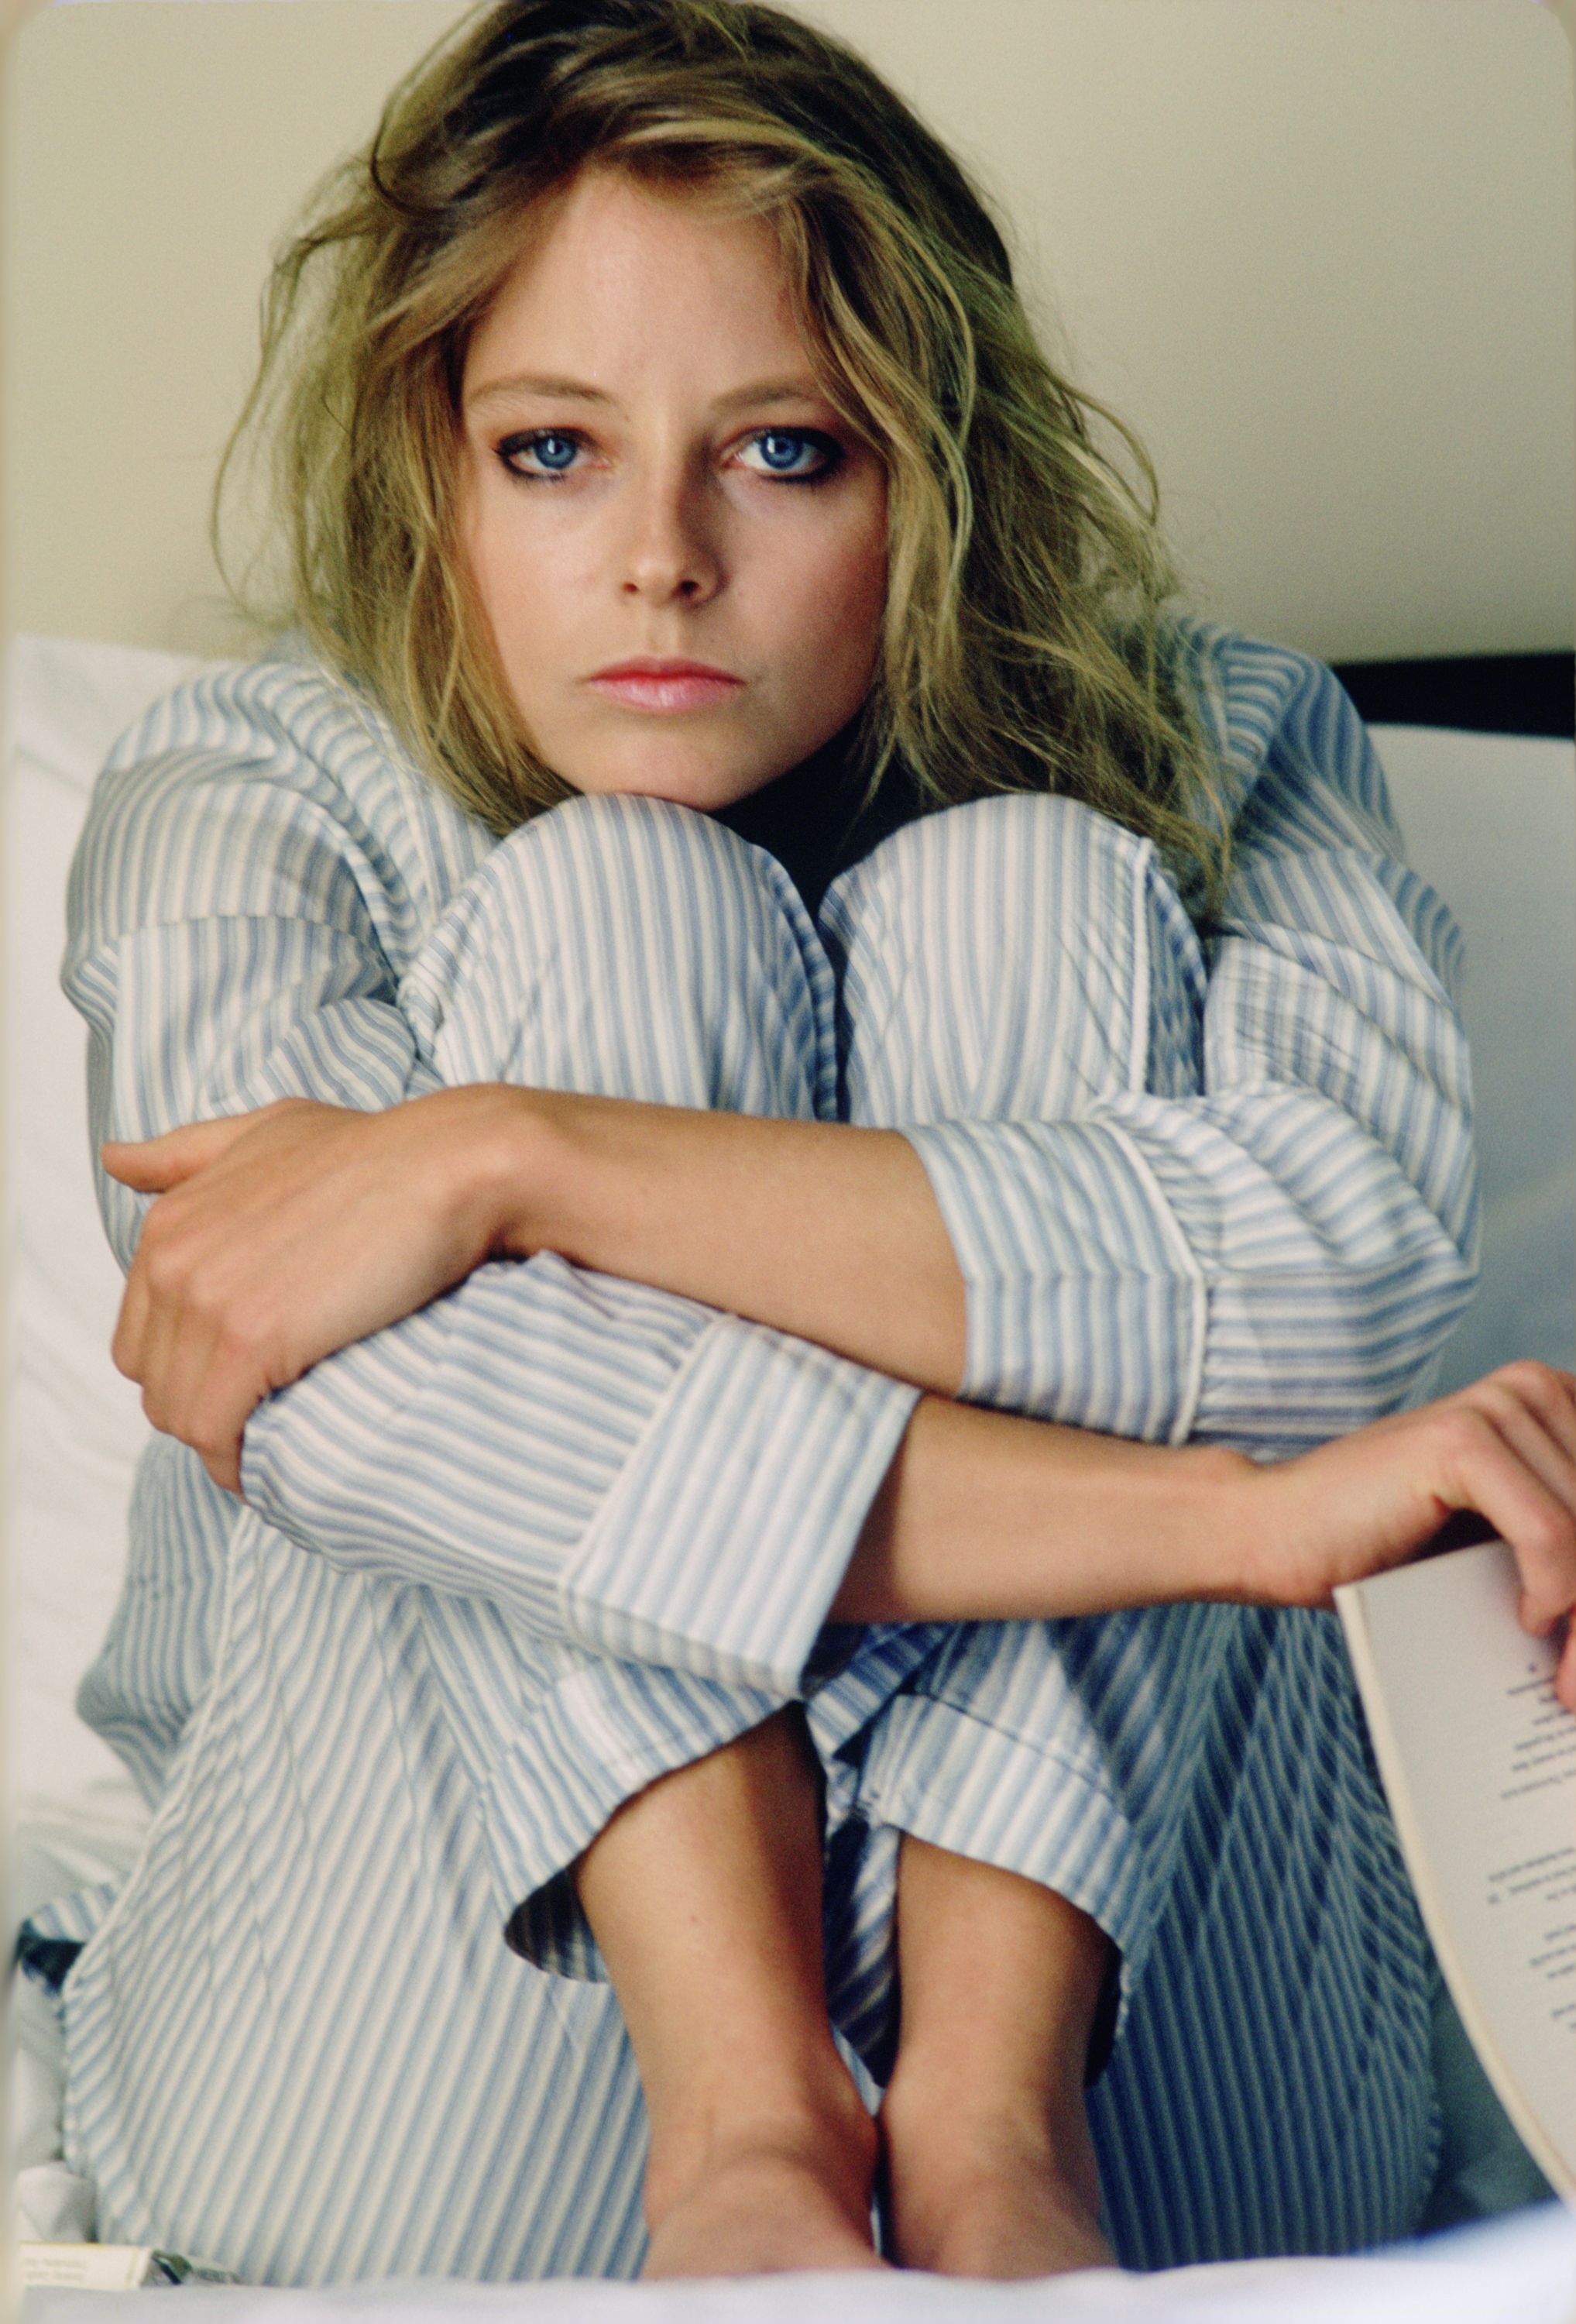 andy dill add jodie foster sexy pics photo